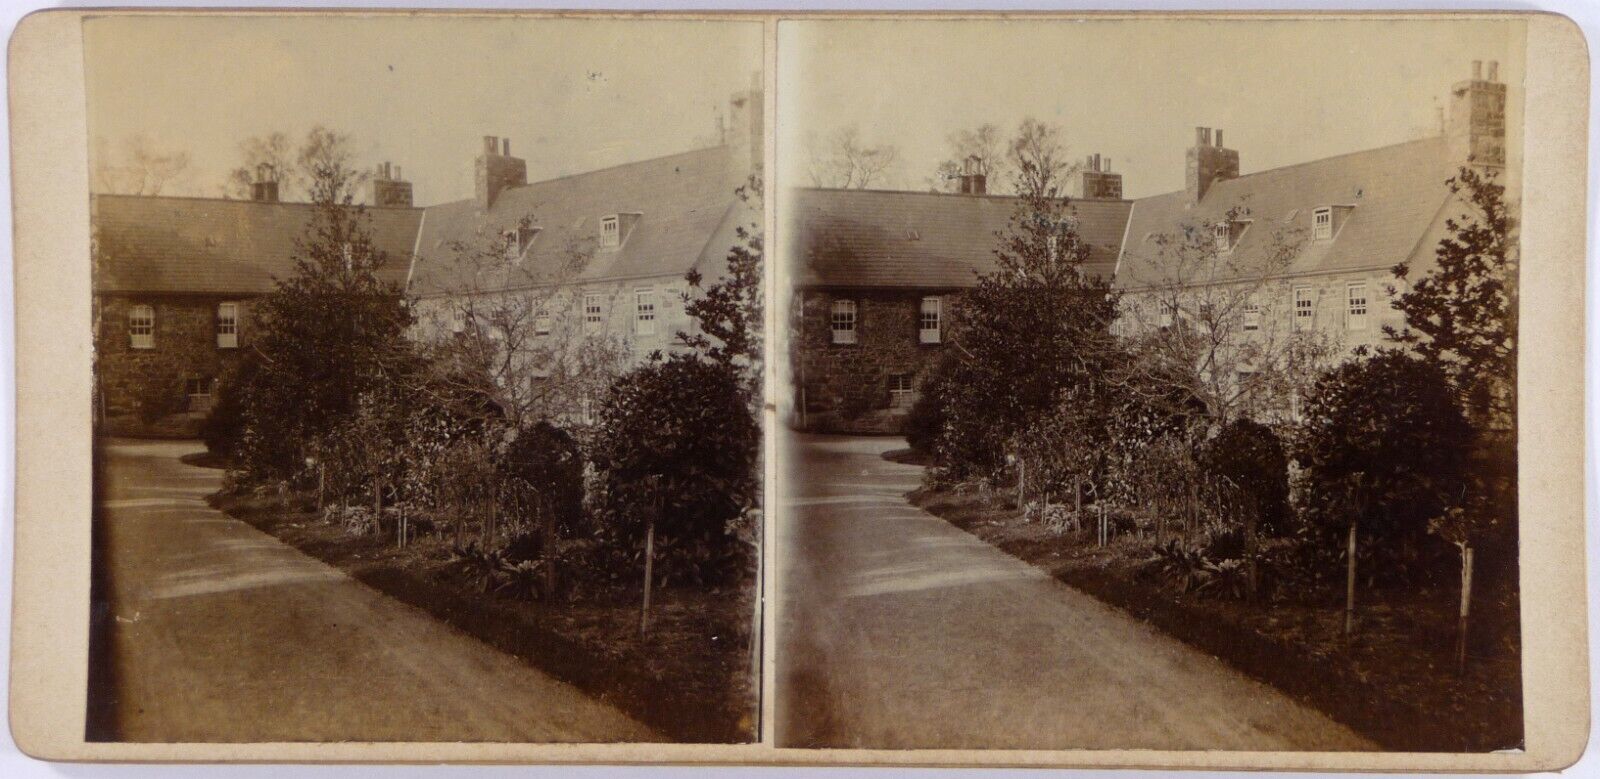 Jersey.U.K.Mrs. Langtry's Bithplace.Stereoview.Photo Stereo P.Alexander & R.Eager